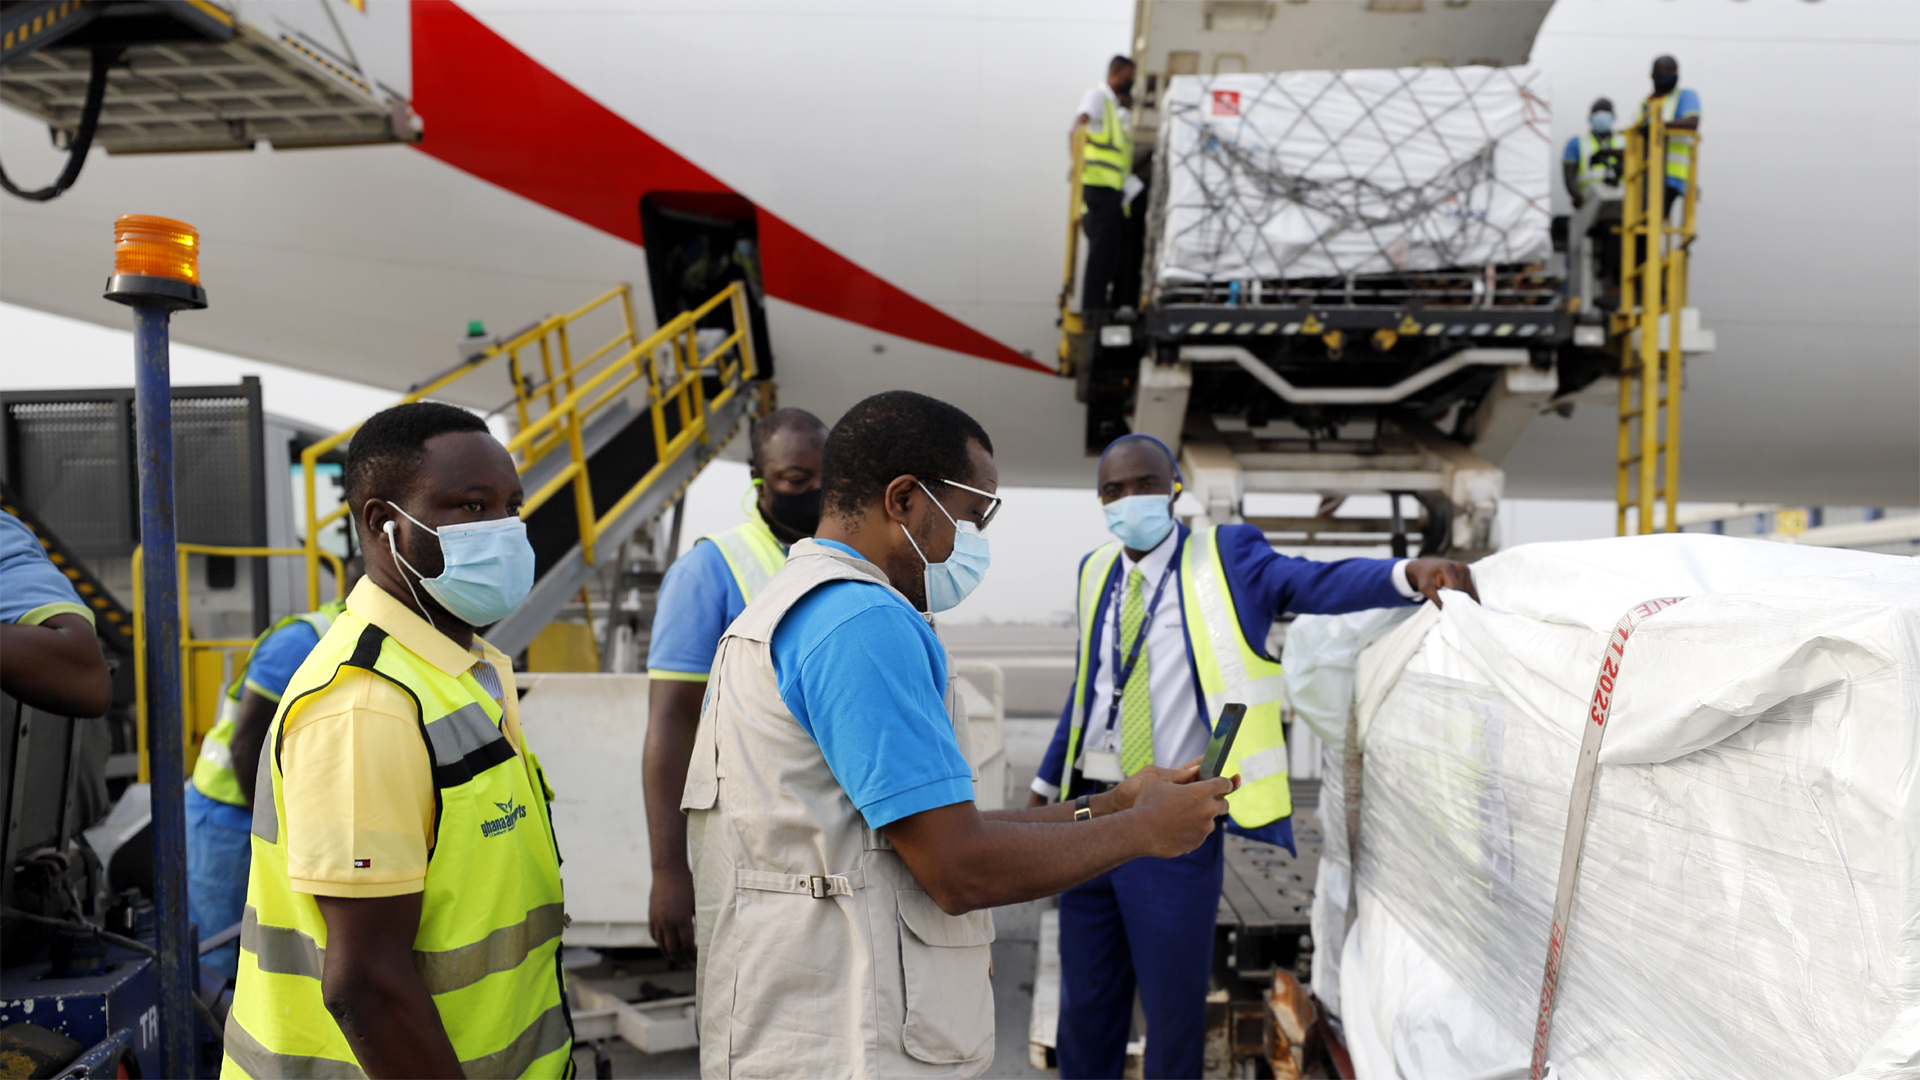 On 24 February 2021, a plane carrying the first shipment of 600,000 Covid 19 vaccines landed at the airport in Accra, Ghana.